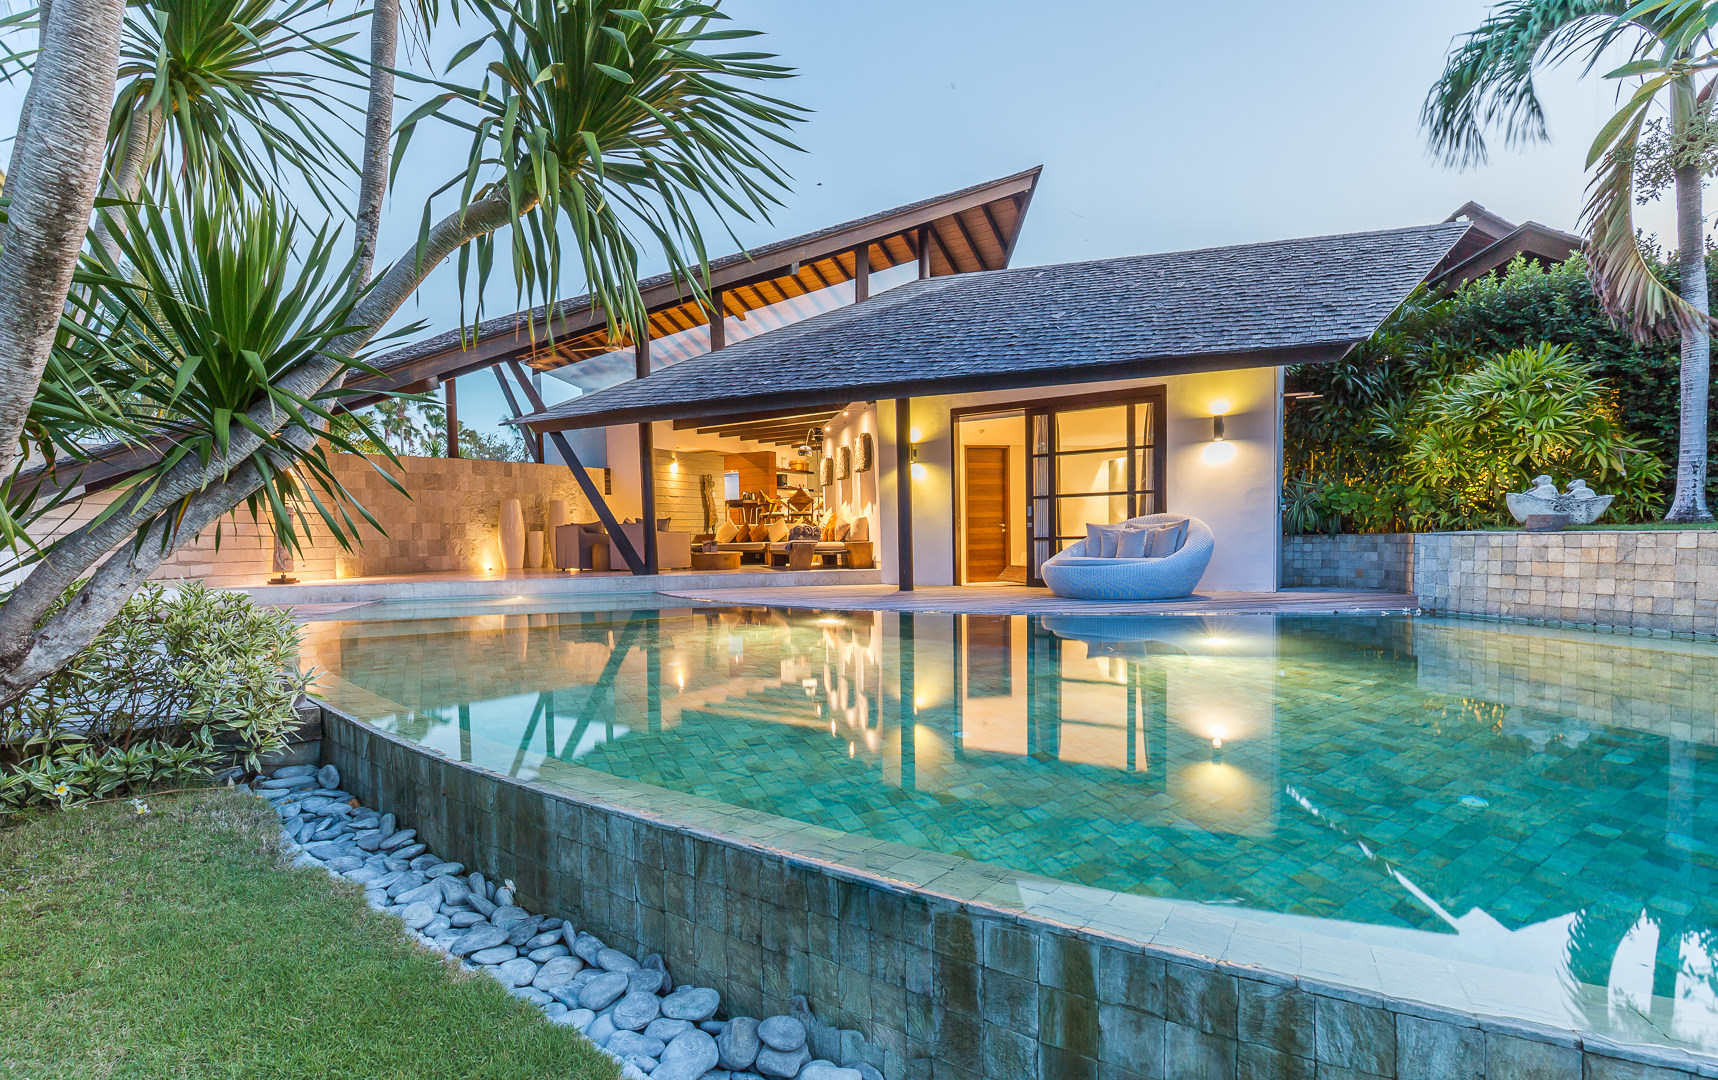 A luxury villa in a residential resort in Seminyak, Bali, typical of this form of property investment that is growing in popularity around the world. Photo: Exotiq Property